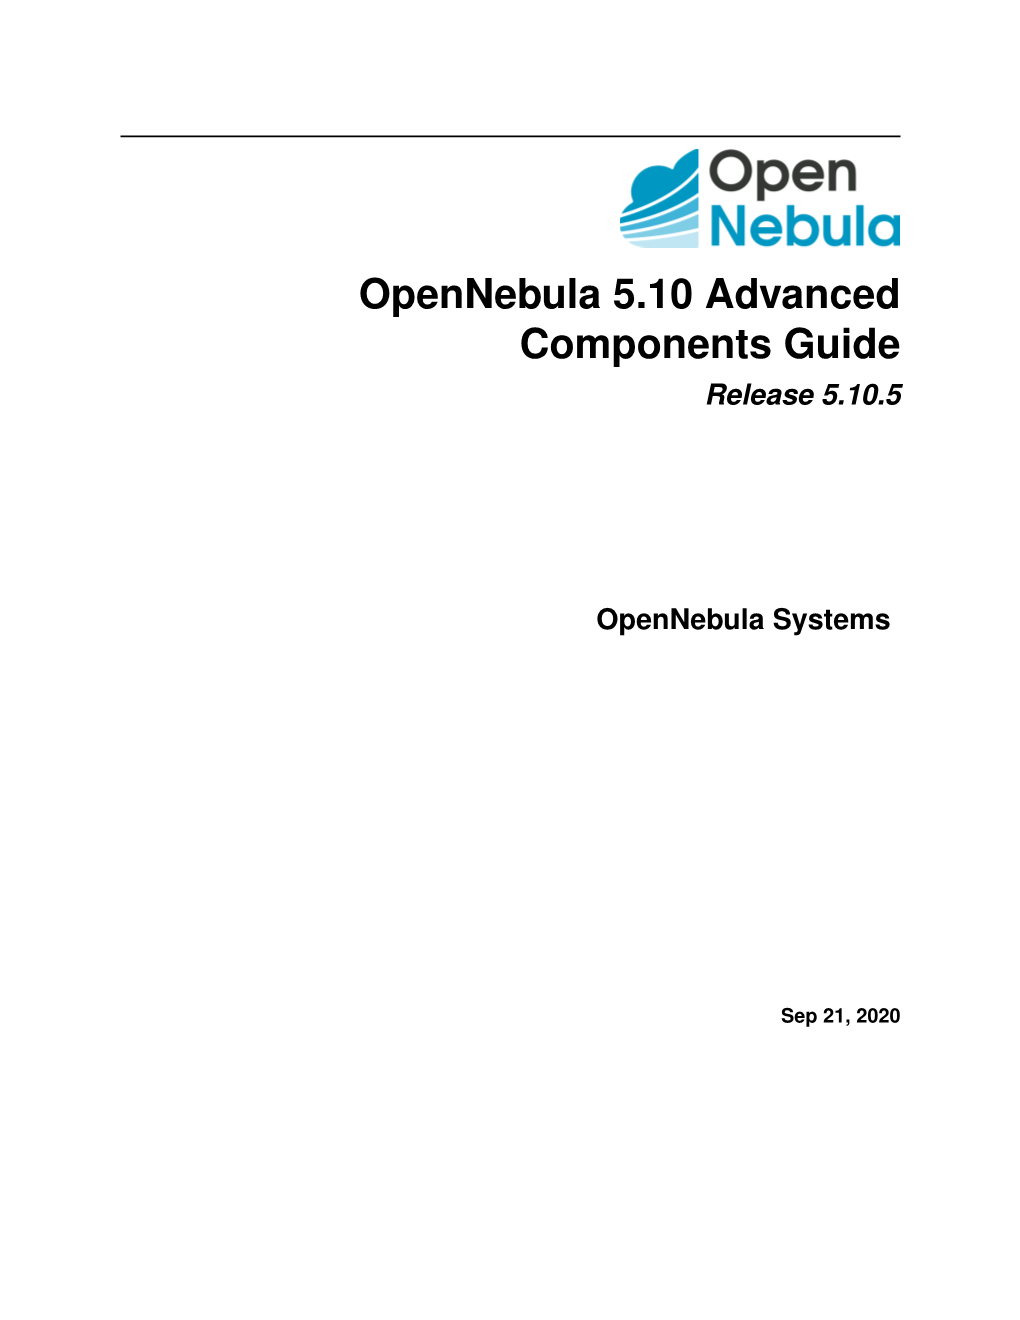 Opennebula 5.10 Advanced Components Guide Release 5.10.5